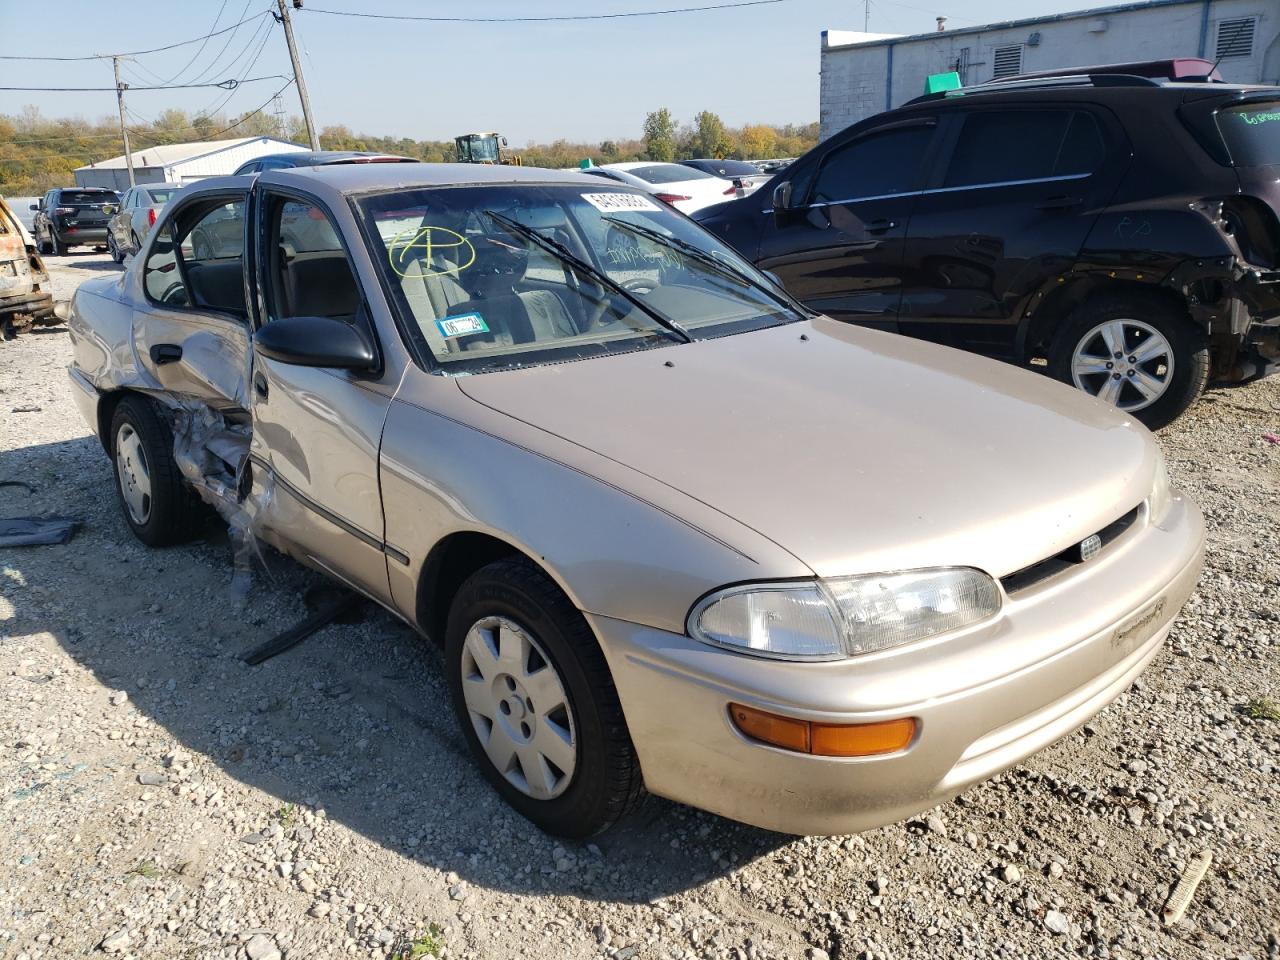 1997 GEO Prizm Base for sale at Copart Chicago Heights, IL Lot #64316*** |  SalvageReseller.com